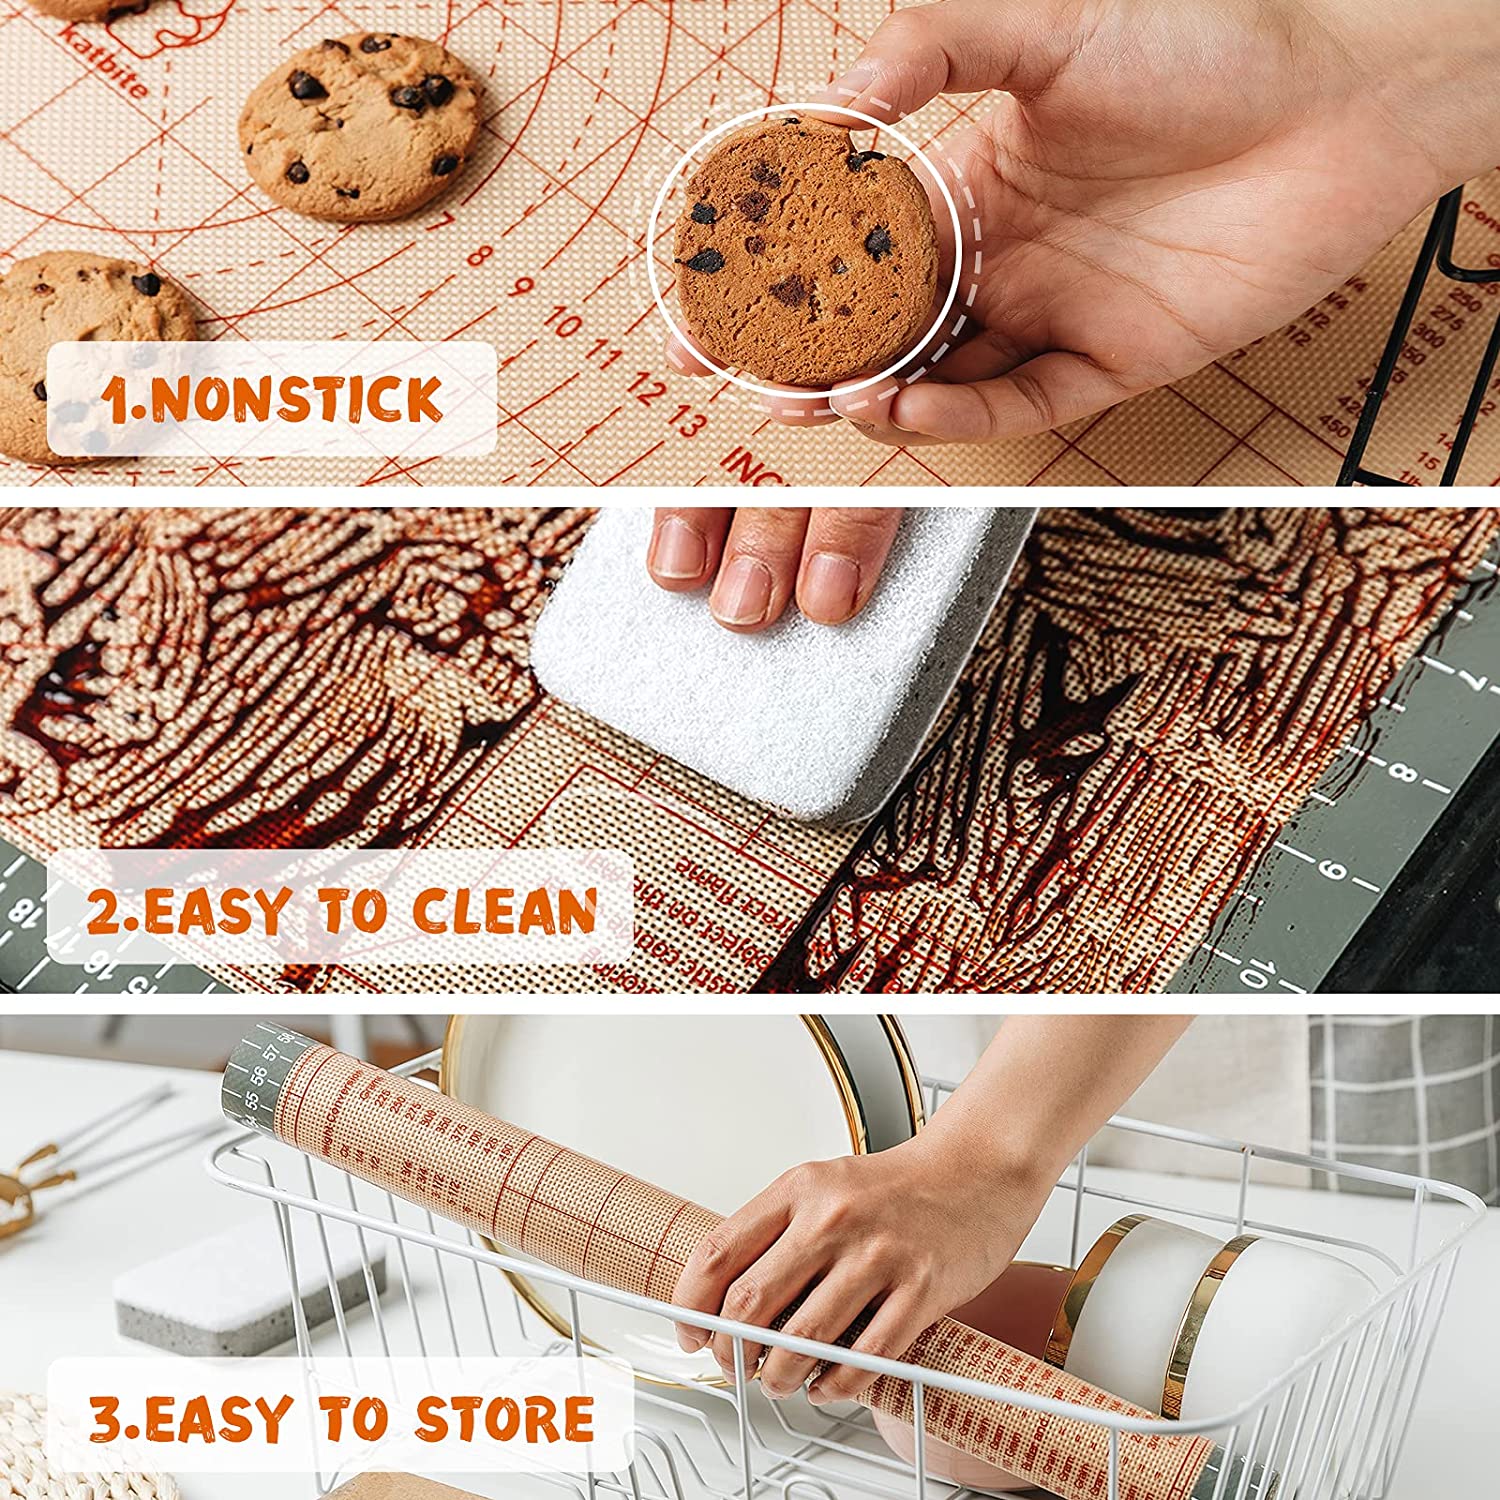 Silicone Baking Mat Cookie Sheet Set of 3 Non-Stick Baking Sheet for Oven  Pan Liner Reusable Parchment Paper Half Sheet Large Cooking Baking Supplies